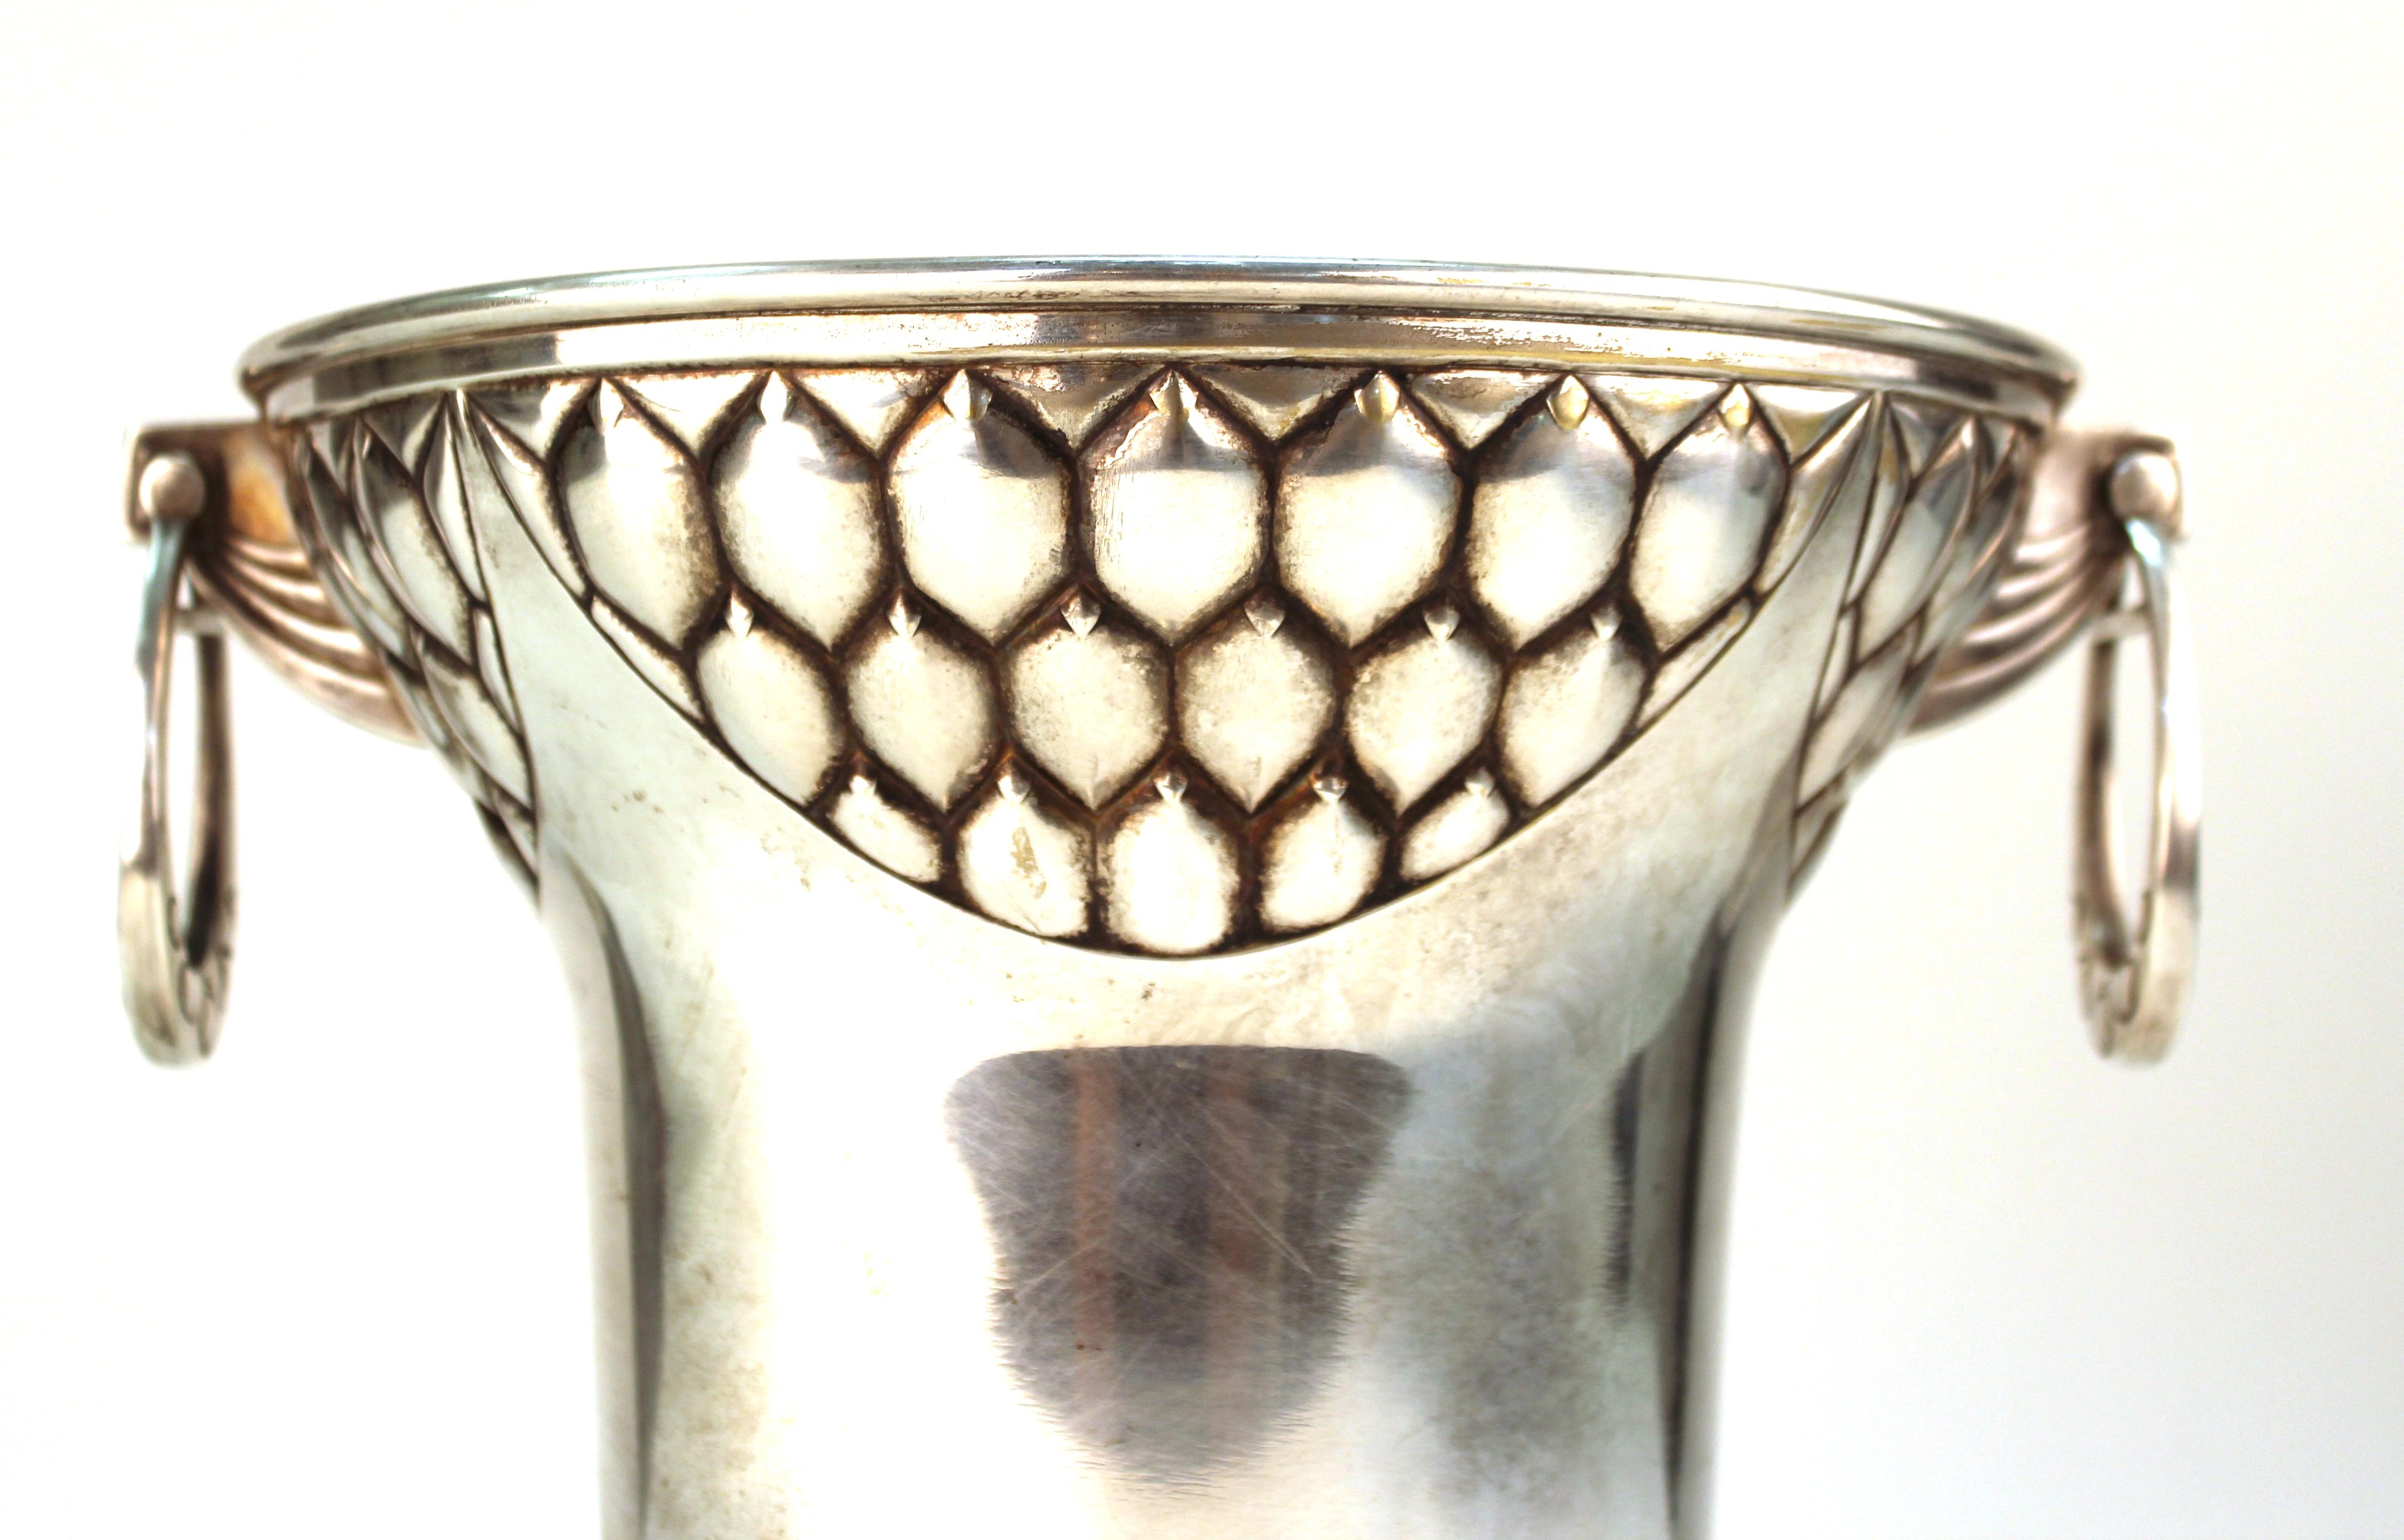 German Secessionist silver plated ice bucket made by the Württembergische Metallwarenfabrik or WMF. The piece is decorated with a secessionist simplified natural motif and has makers marks on the bottom. In great vintage condition with some